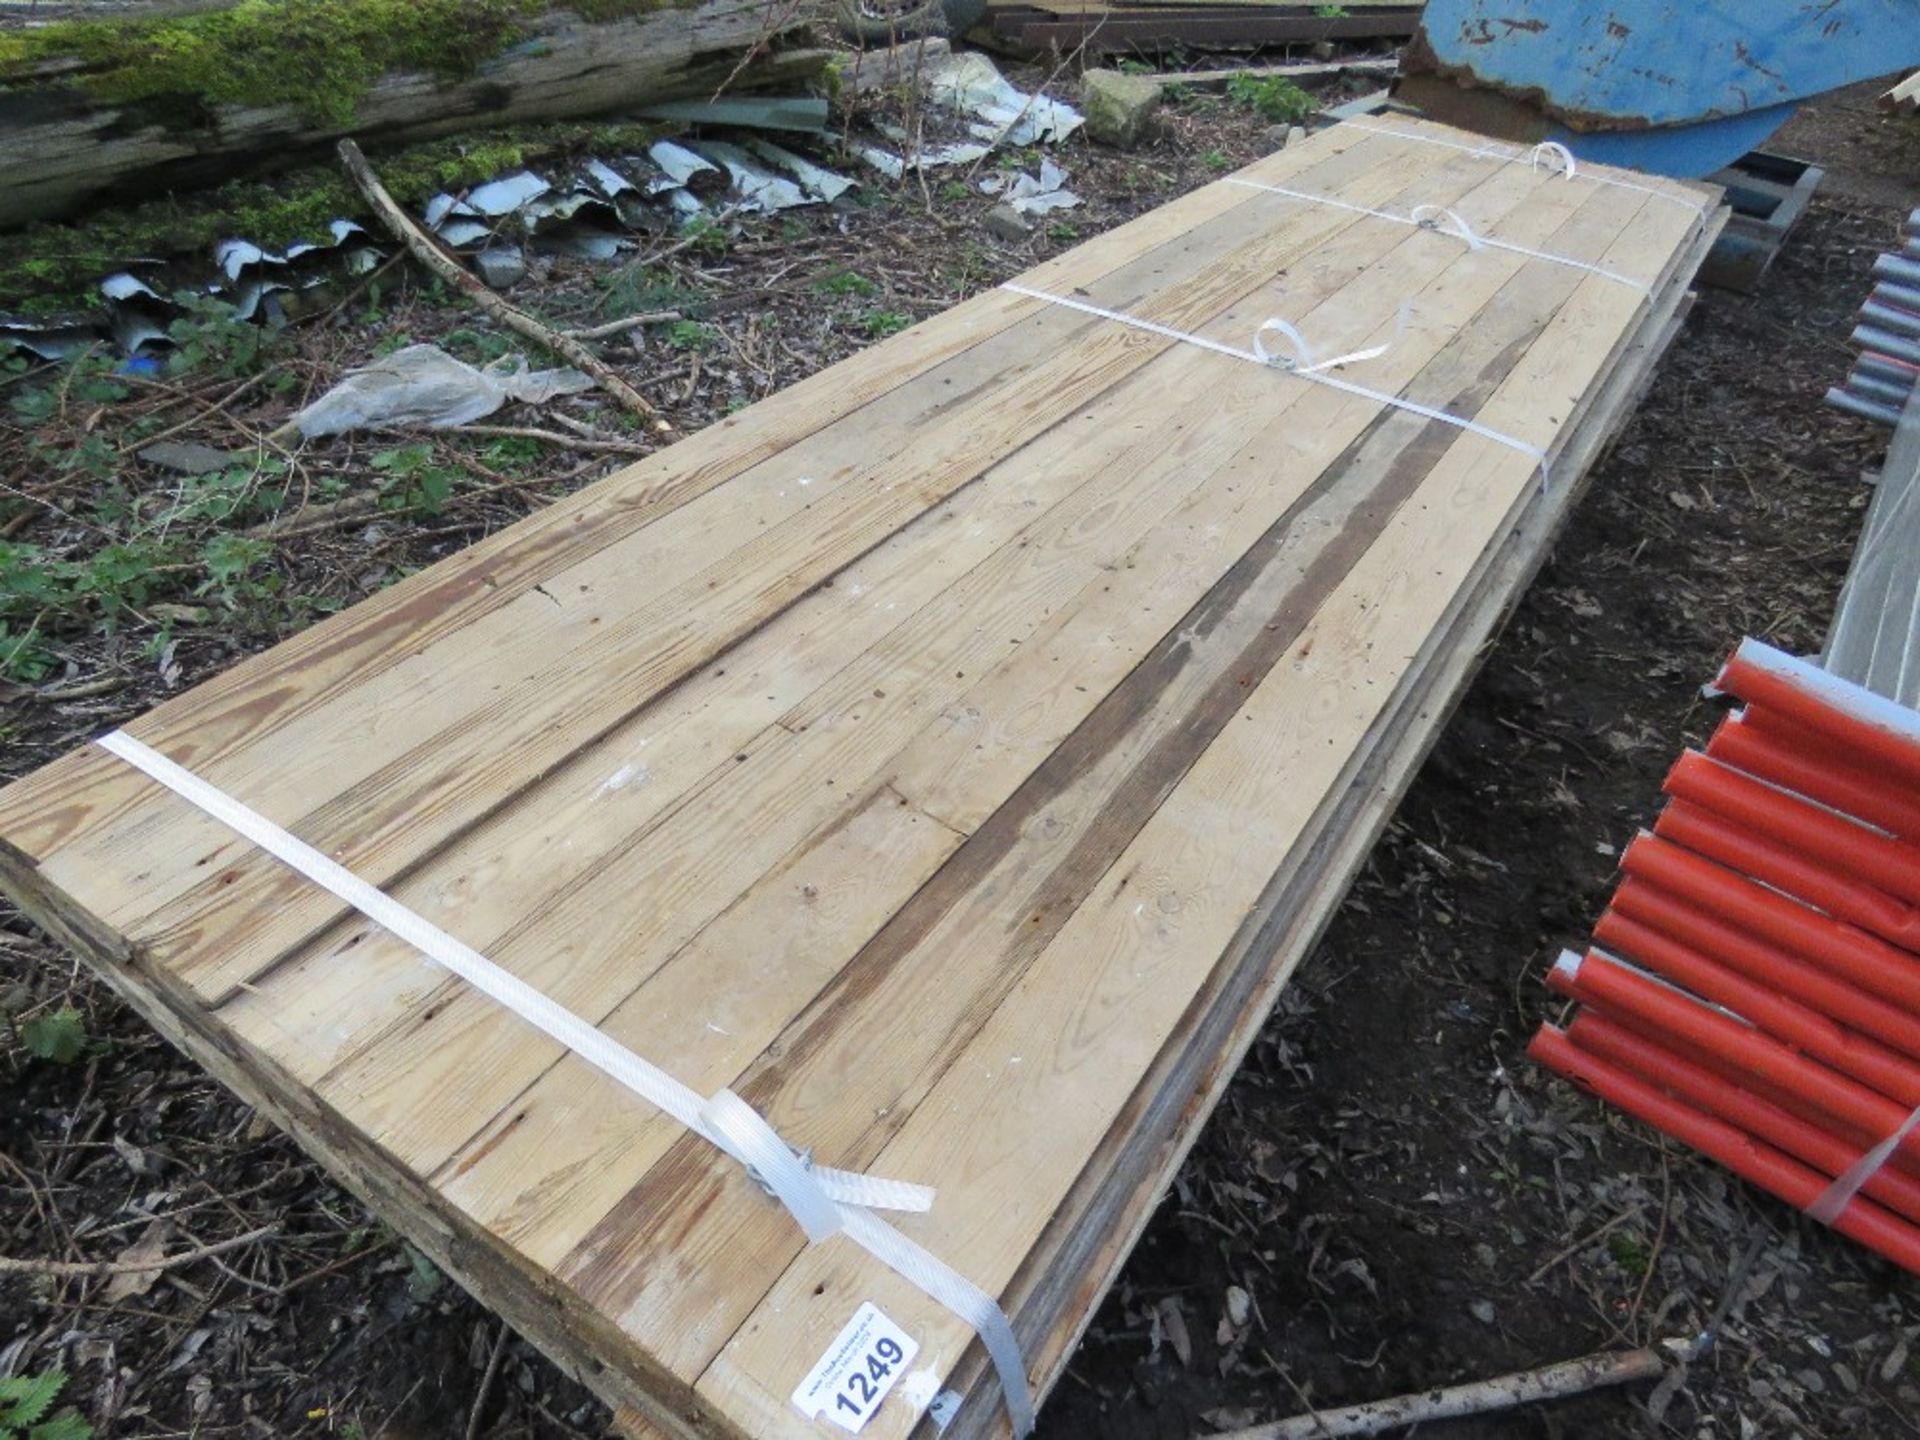 QUANTITY OF 4"TONGUE AND GROOVE BOARDS AND OTHERS 3.2-3.6M LENGTH APPROX.....THIS LOT IS SOLD UNDER